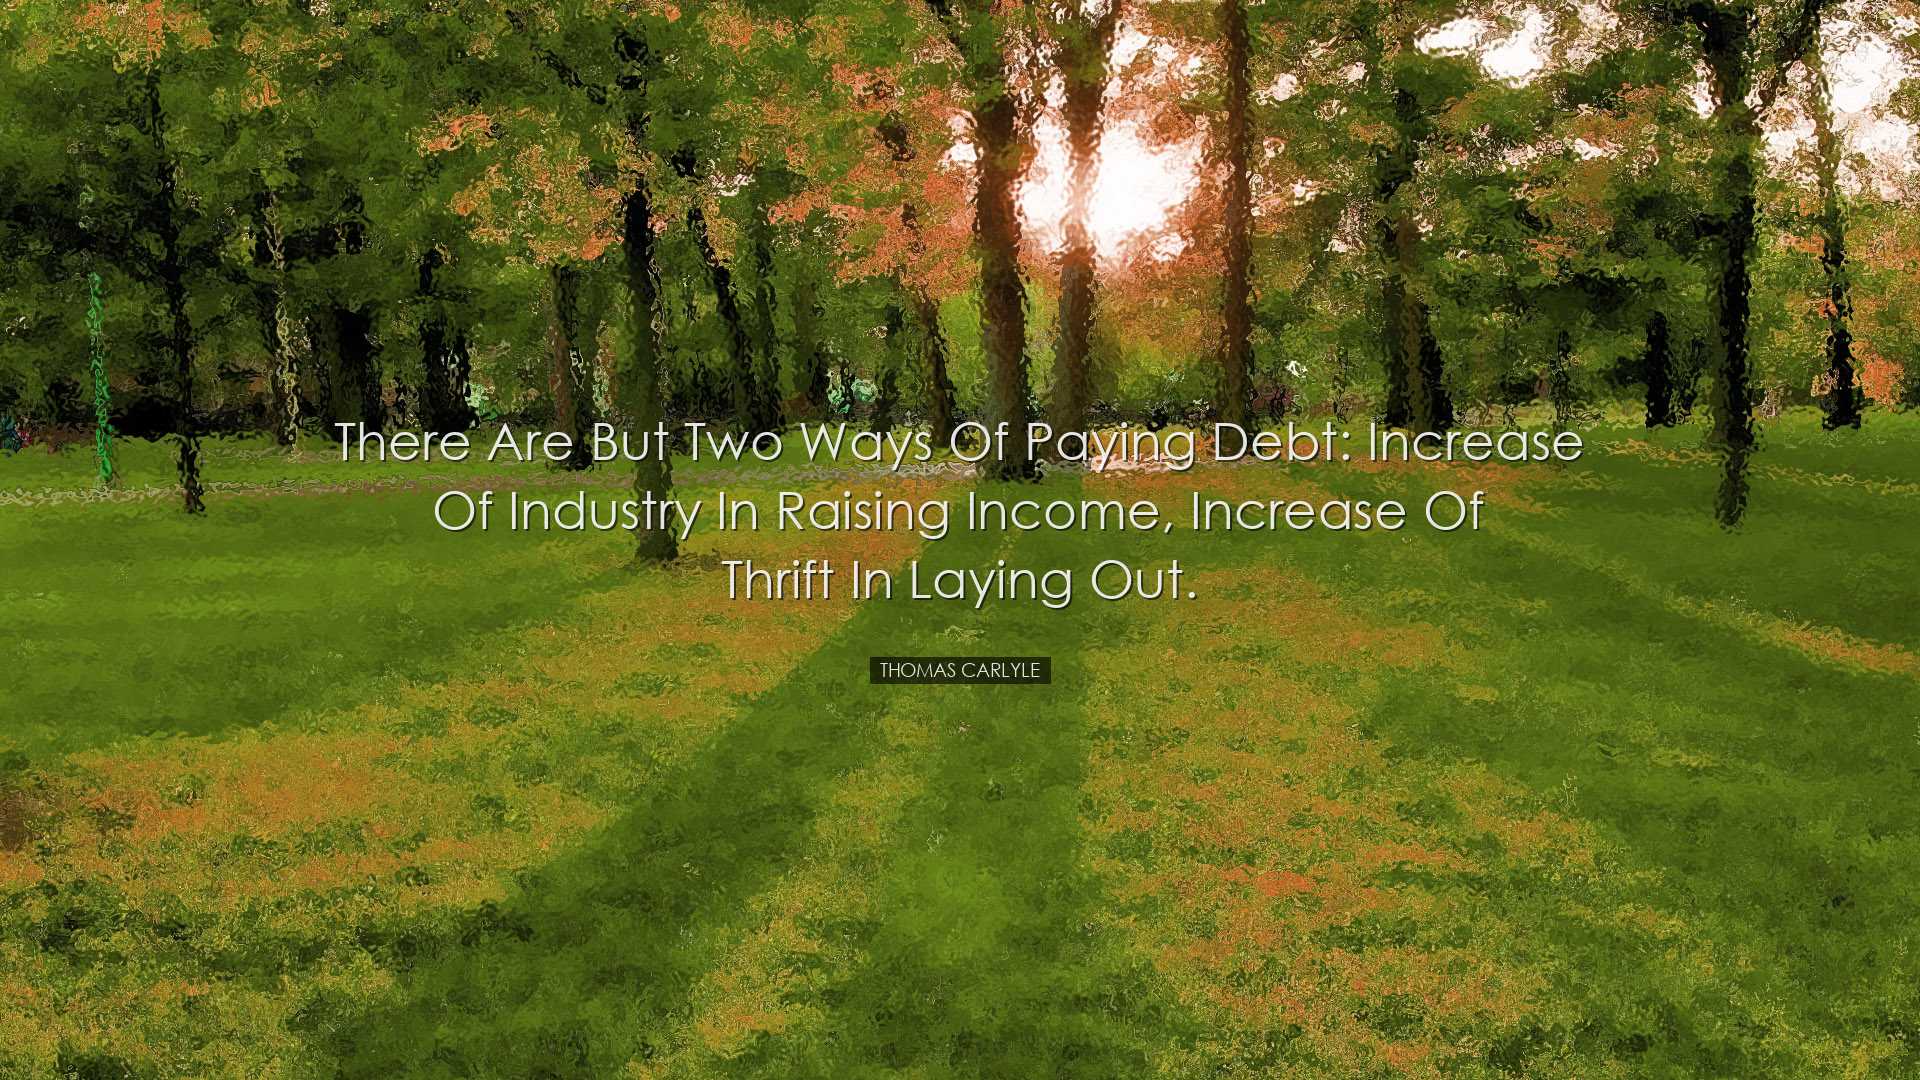 There are but two ways of paying debt: Increase of industry in rai